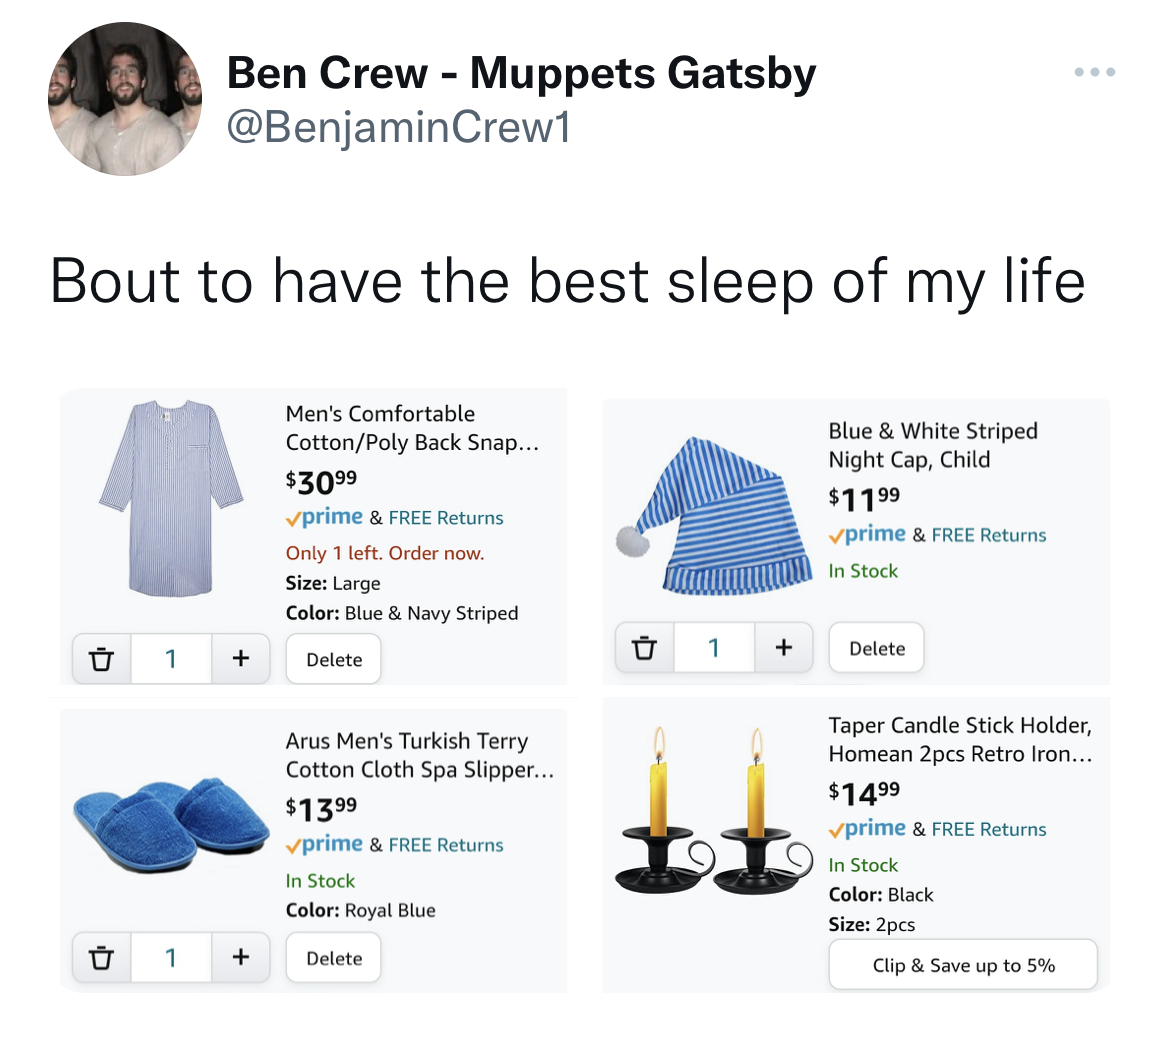 funny and fresh tweets - diagram - Ben Crew Muppets Gatsby Bout to have the best sleep of my life Men's Comfortable CottonPoly Back Snap... $3099 Blue & White Striped Night Cap, Child prime & Free Returns 1 Only 1 left. Order now. Size Large Color Blue & 